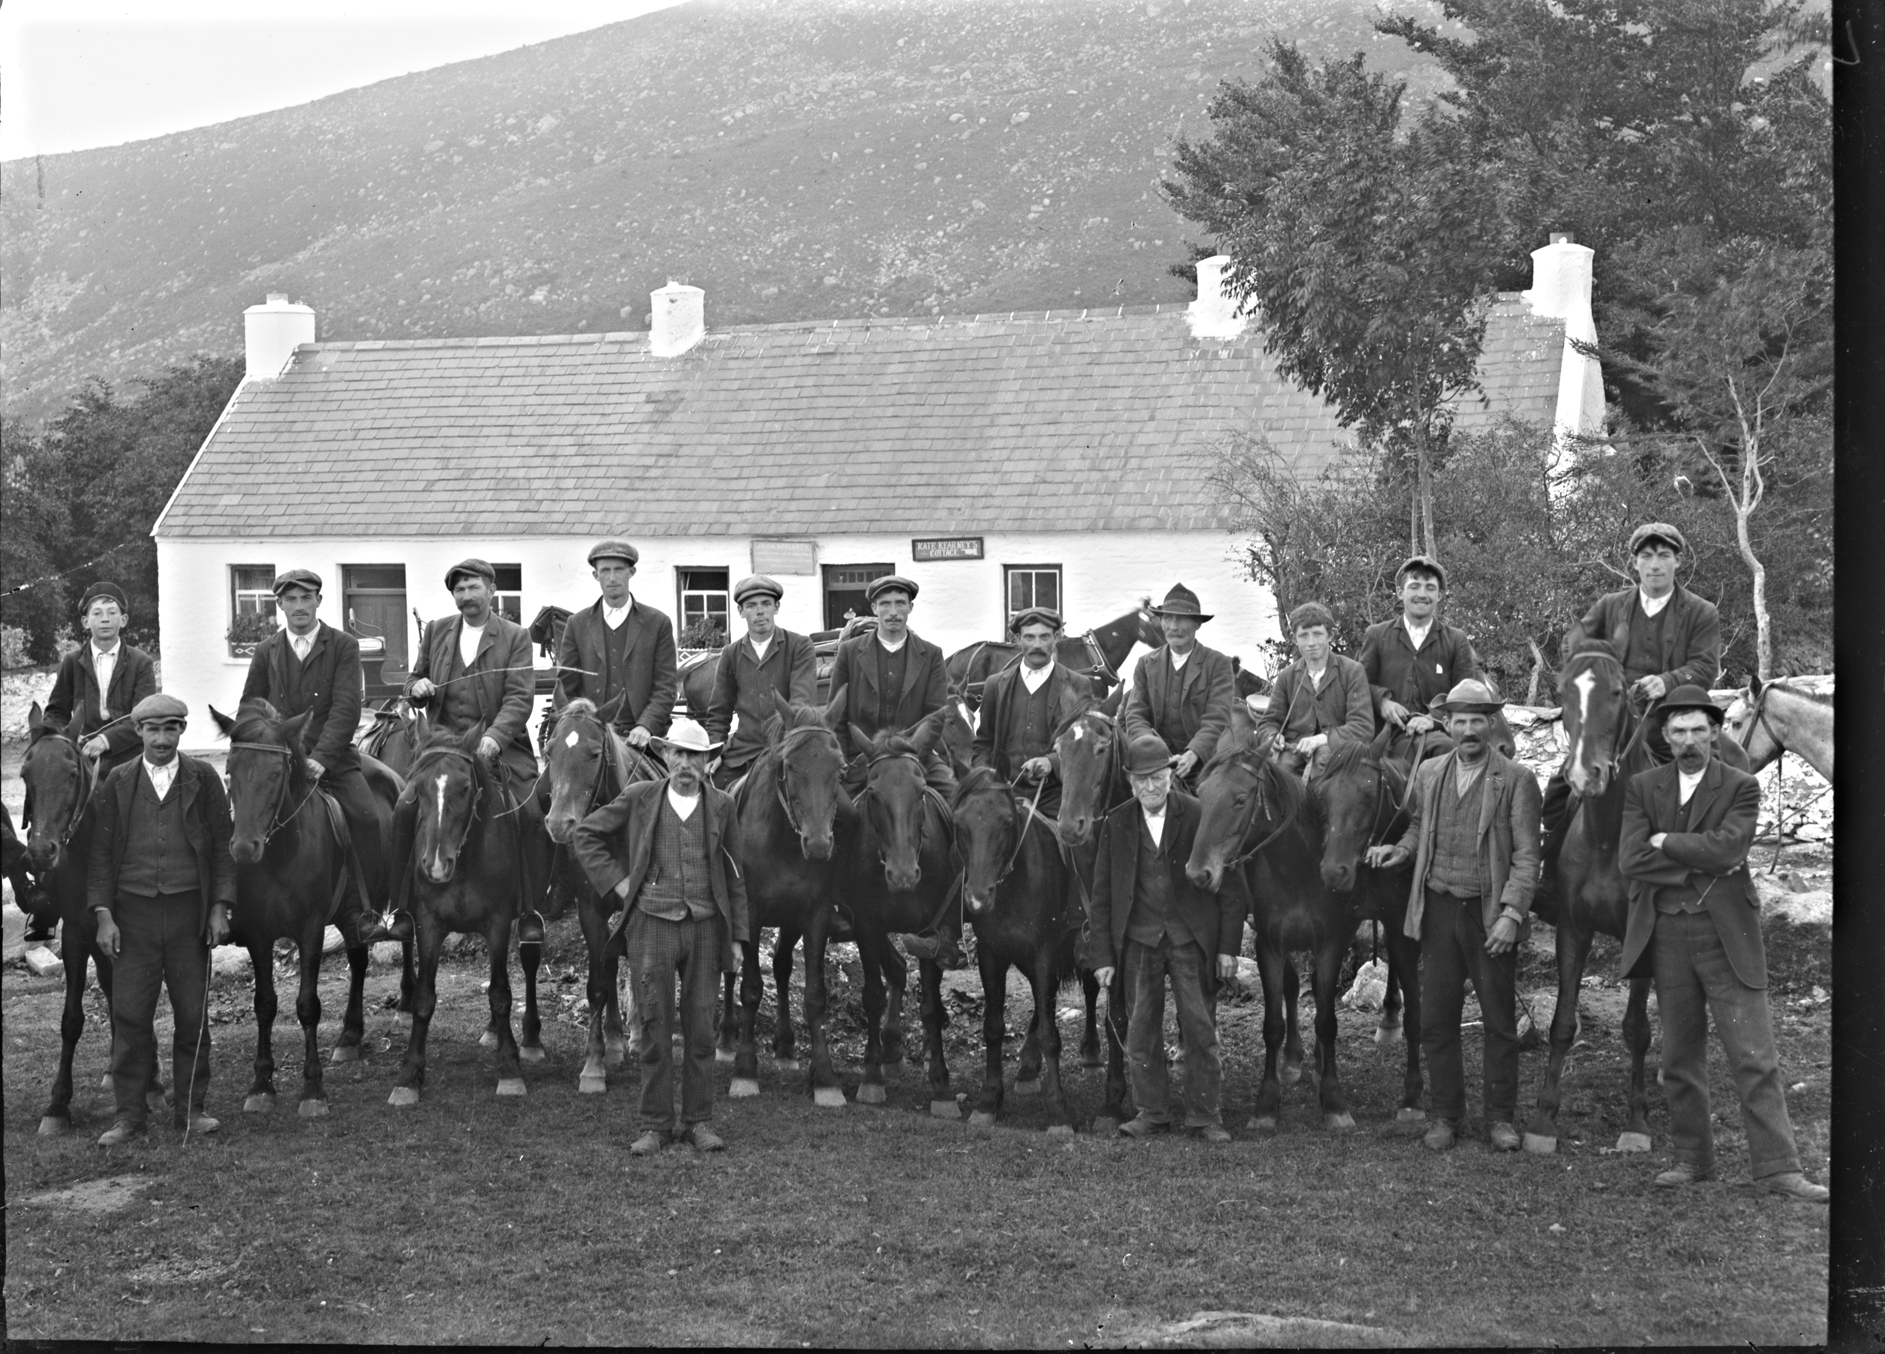 This photo of men on horseback in front of Kate Kearney's Cottage in Kerry really does bring to mind a posse in Western films, with caps instead of stetsons. Were they tour guides perhaps?